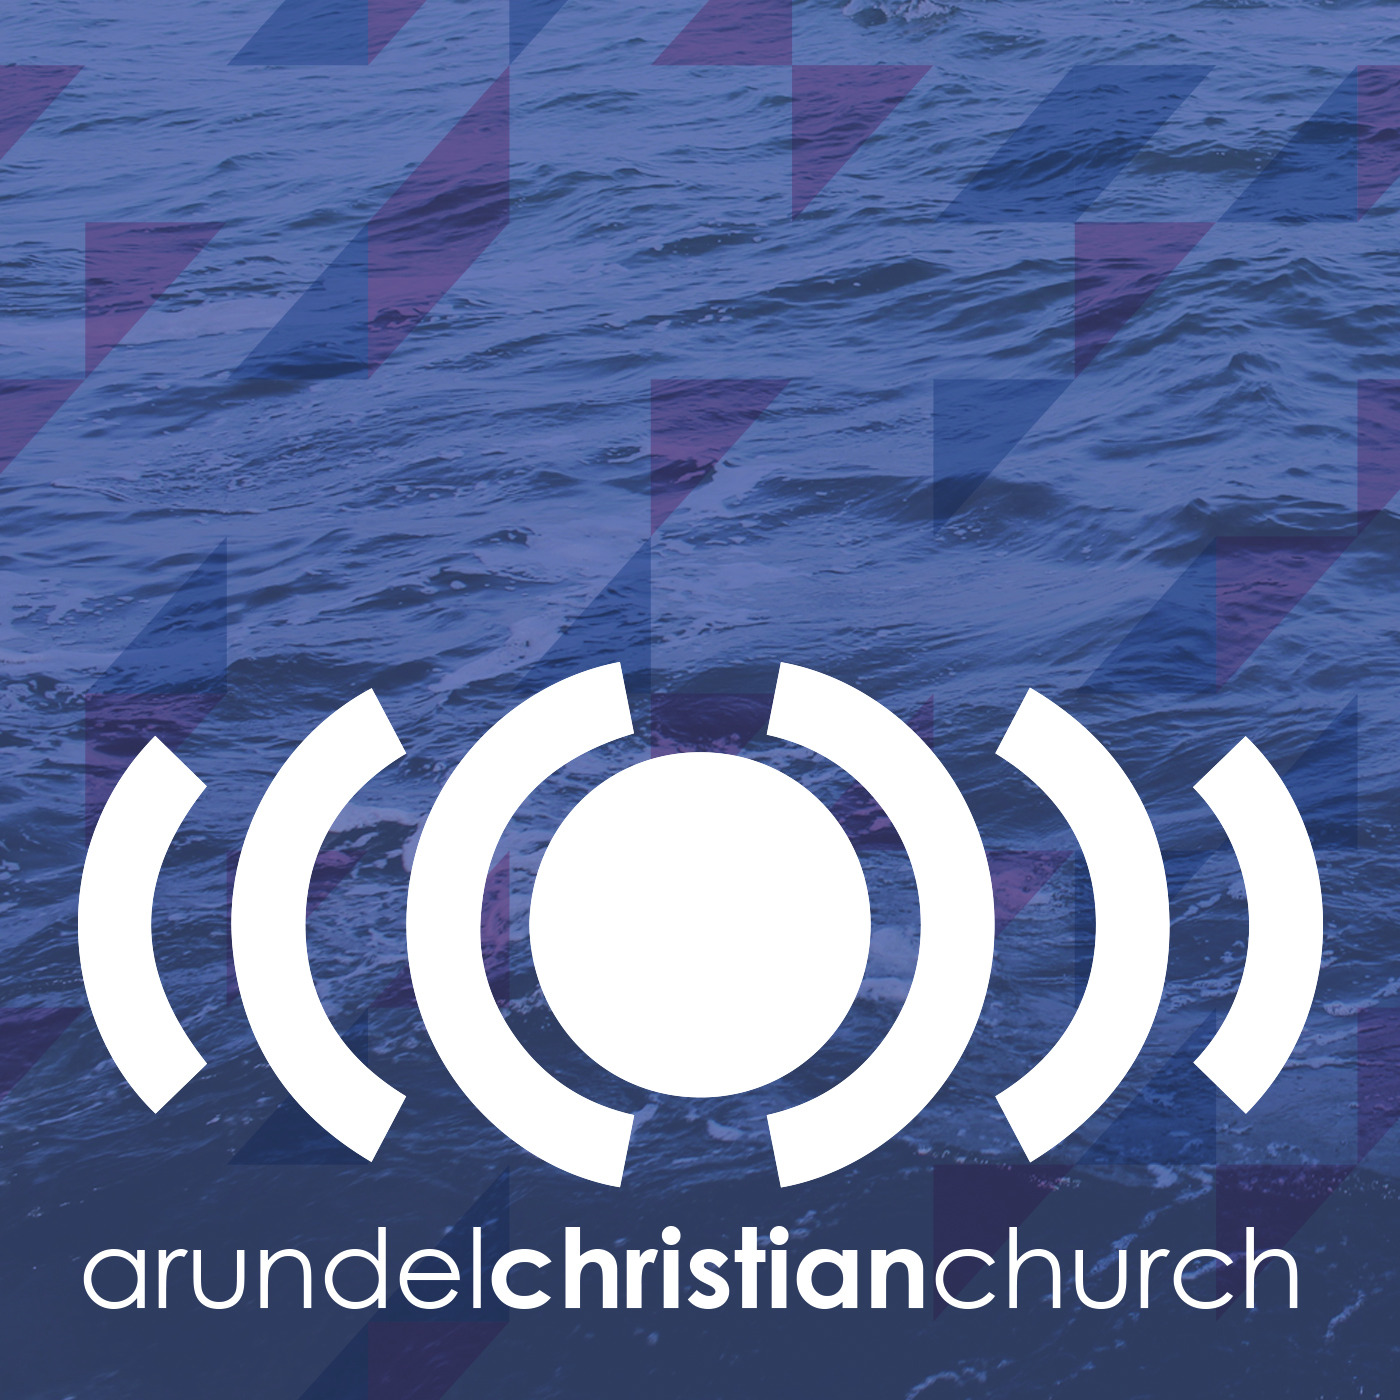 Episode 154: I Will Build My Church - A Church Unified